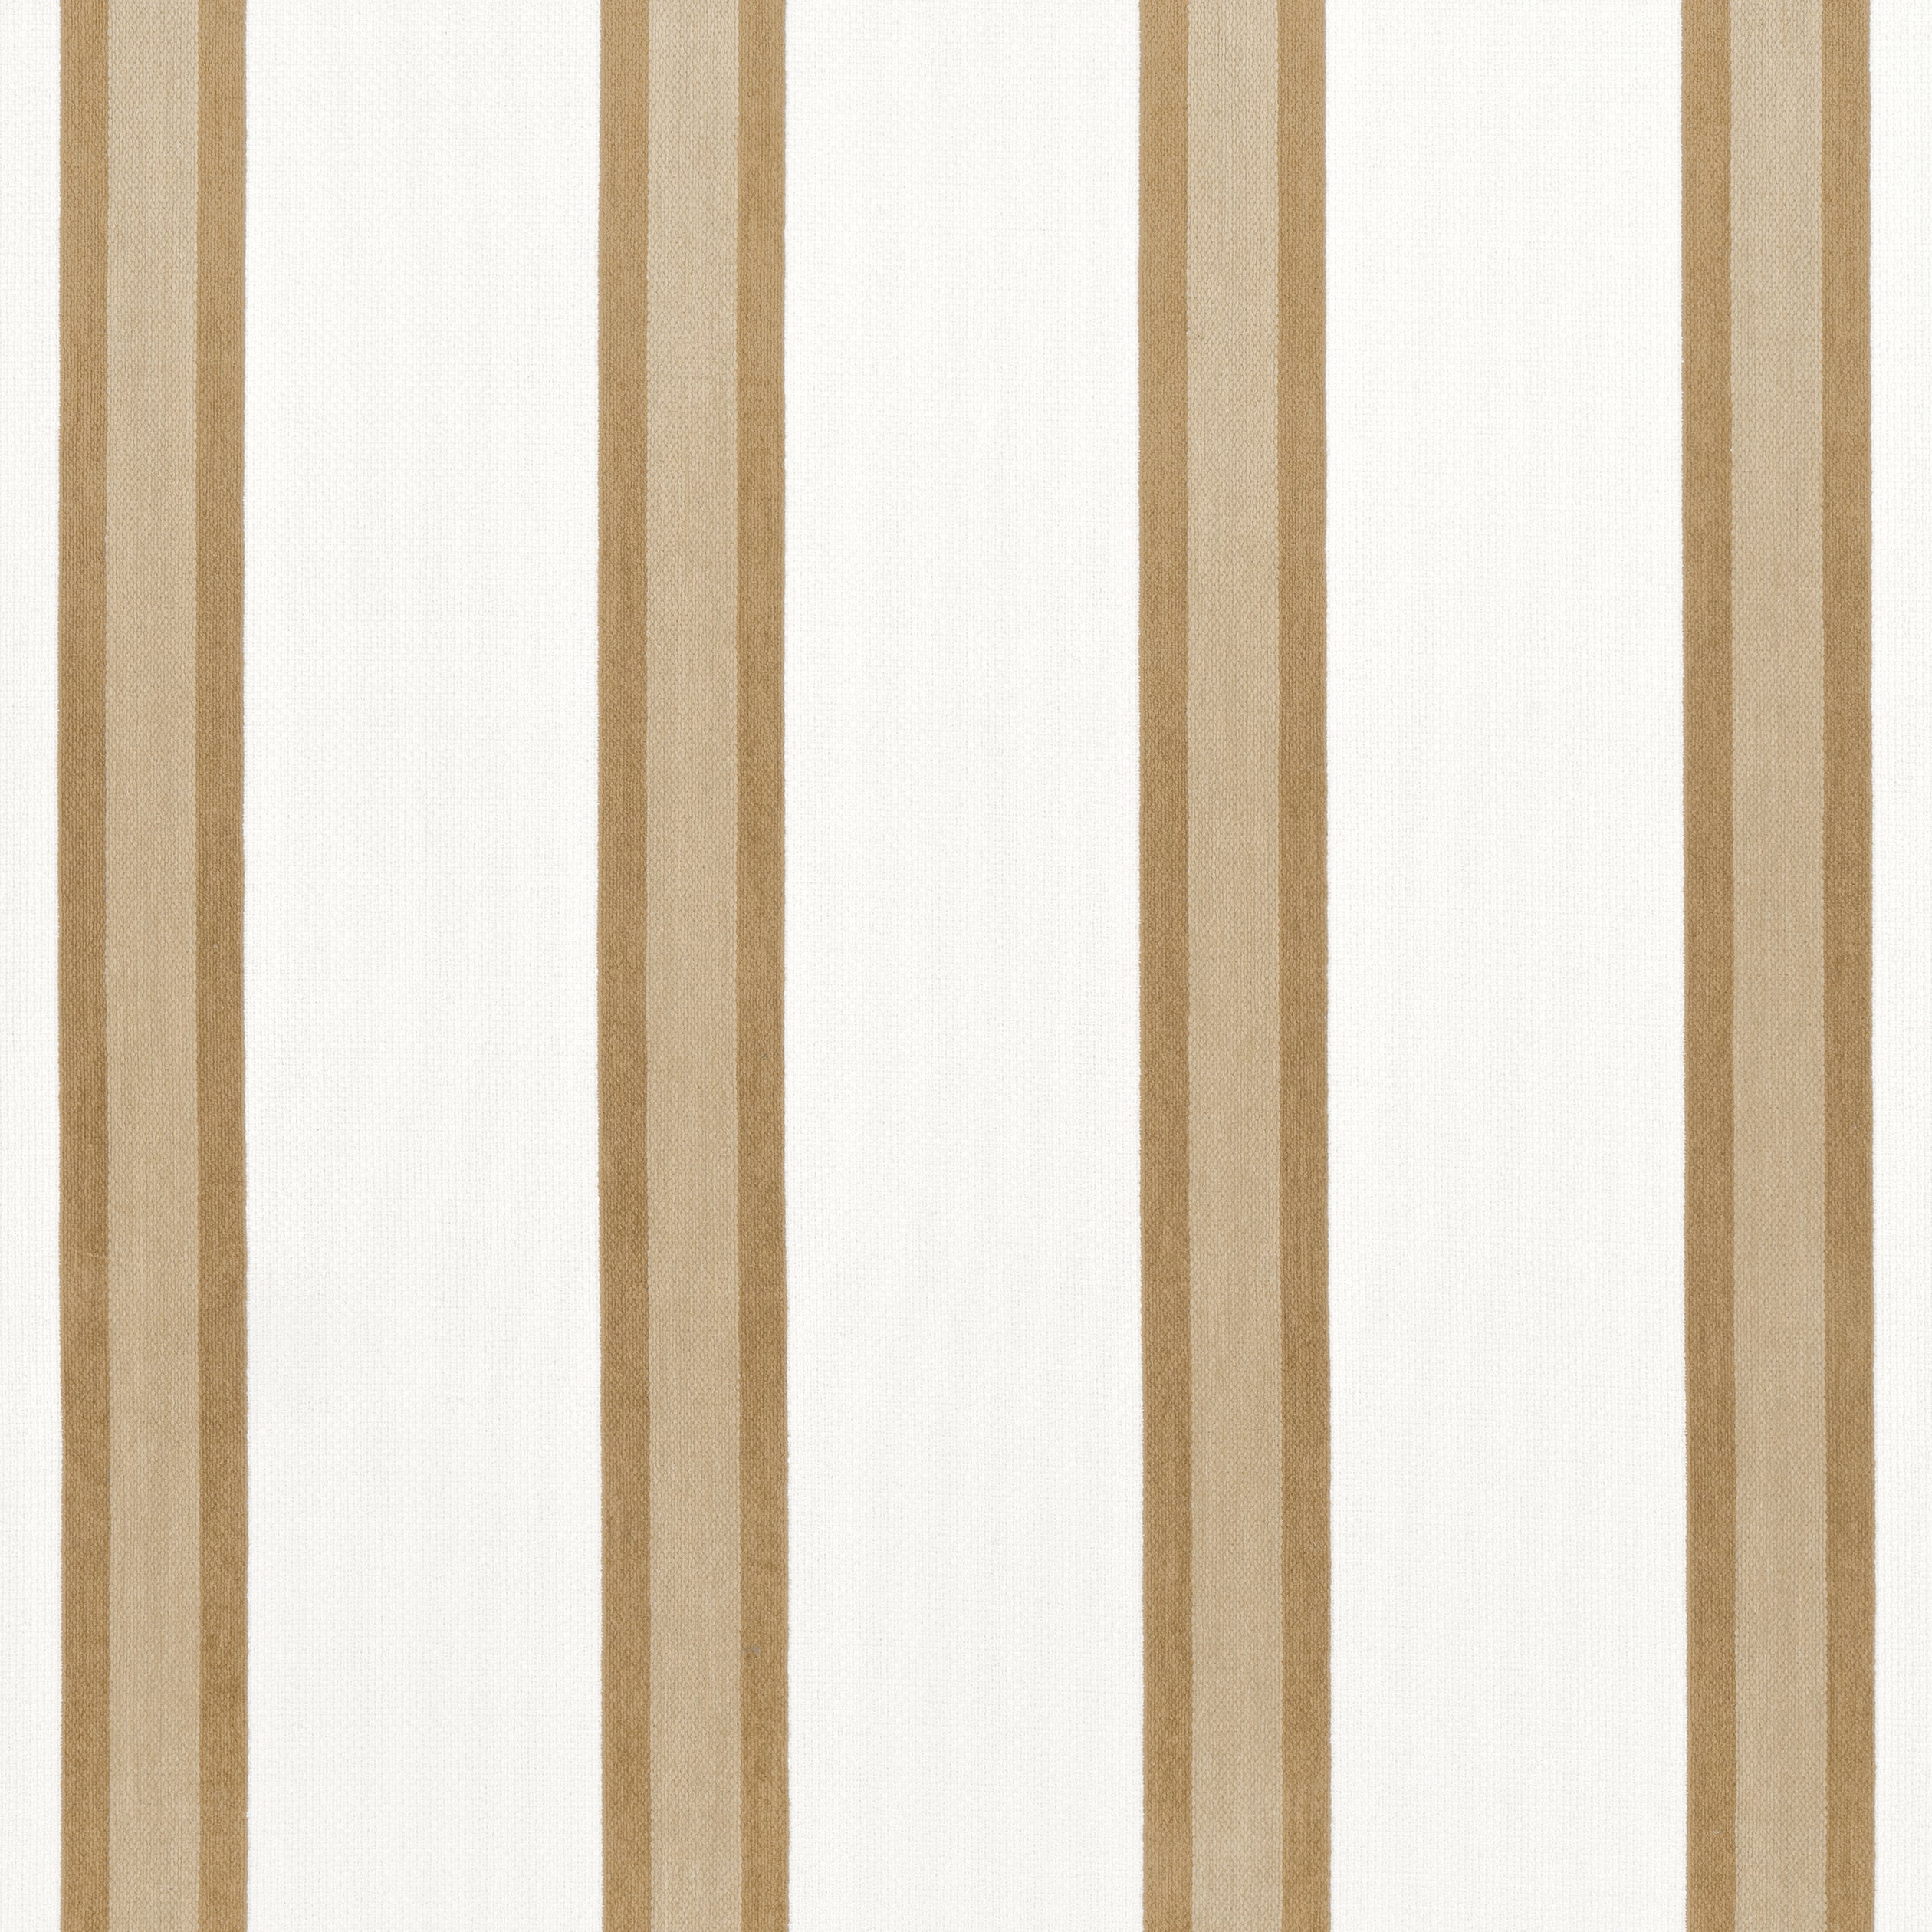 Abito Stripe fabric in camel color - pattern number W77146 - by Thibaut in the Veneto collection